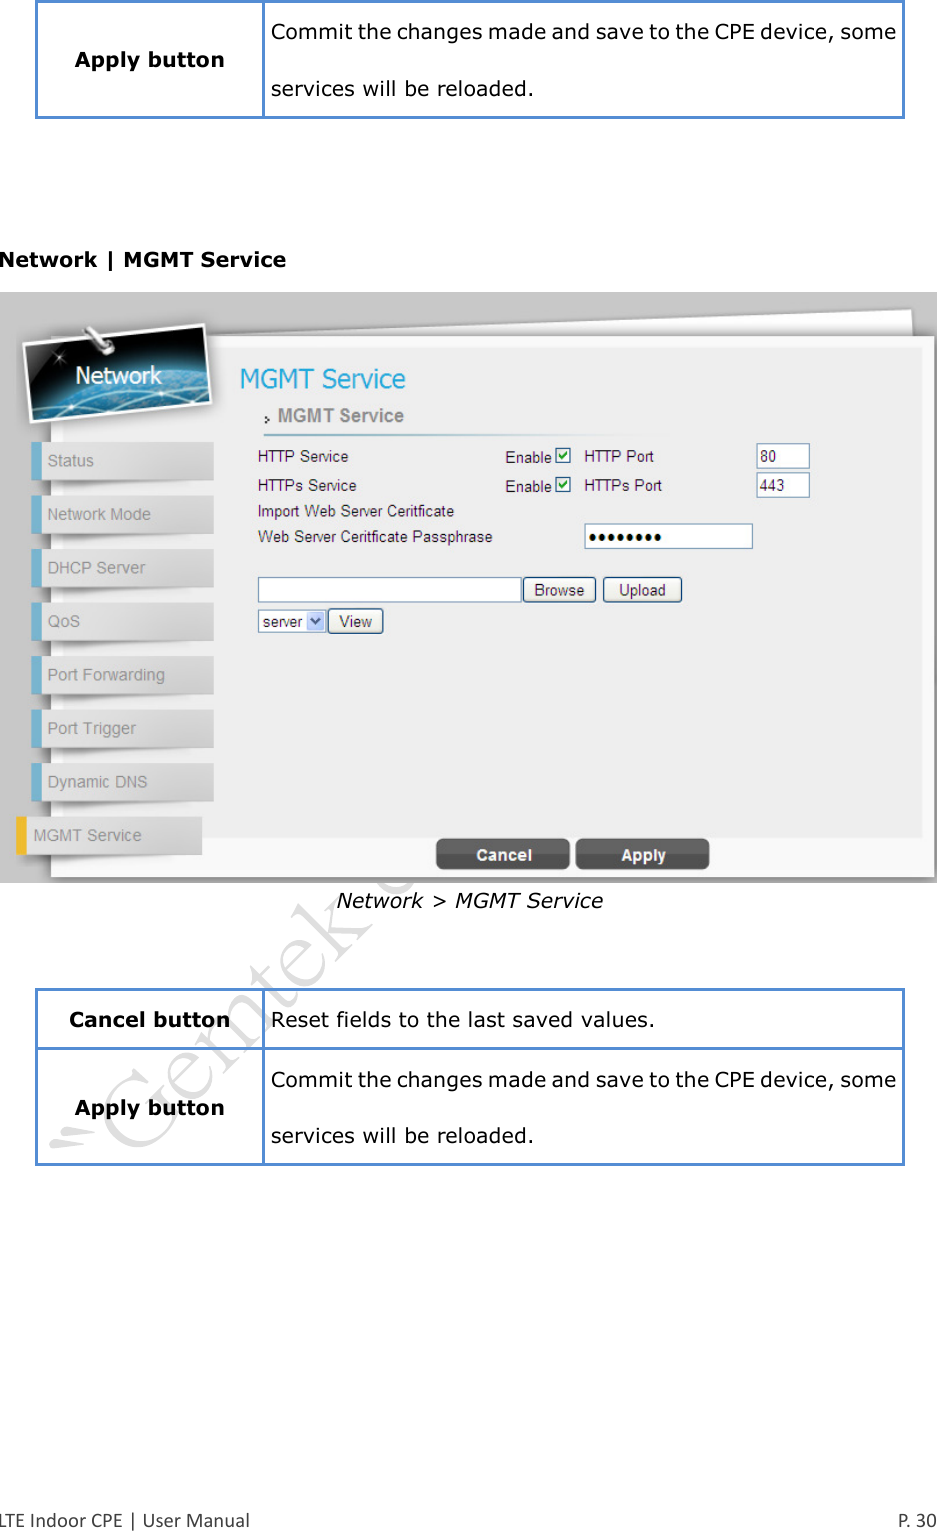  LTE Indoor CPE | User Manual      P. 30 Apply button Commit the changes made and save to the CPE device, some services will be reloaded.    Network | MGMT Service  Network &gt; MGMT Service   Cancel button Reset fields to the last saved values. Apply button Commit the changes made and save to the CPE device, some services will be reloaded. 